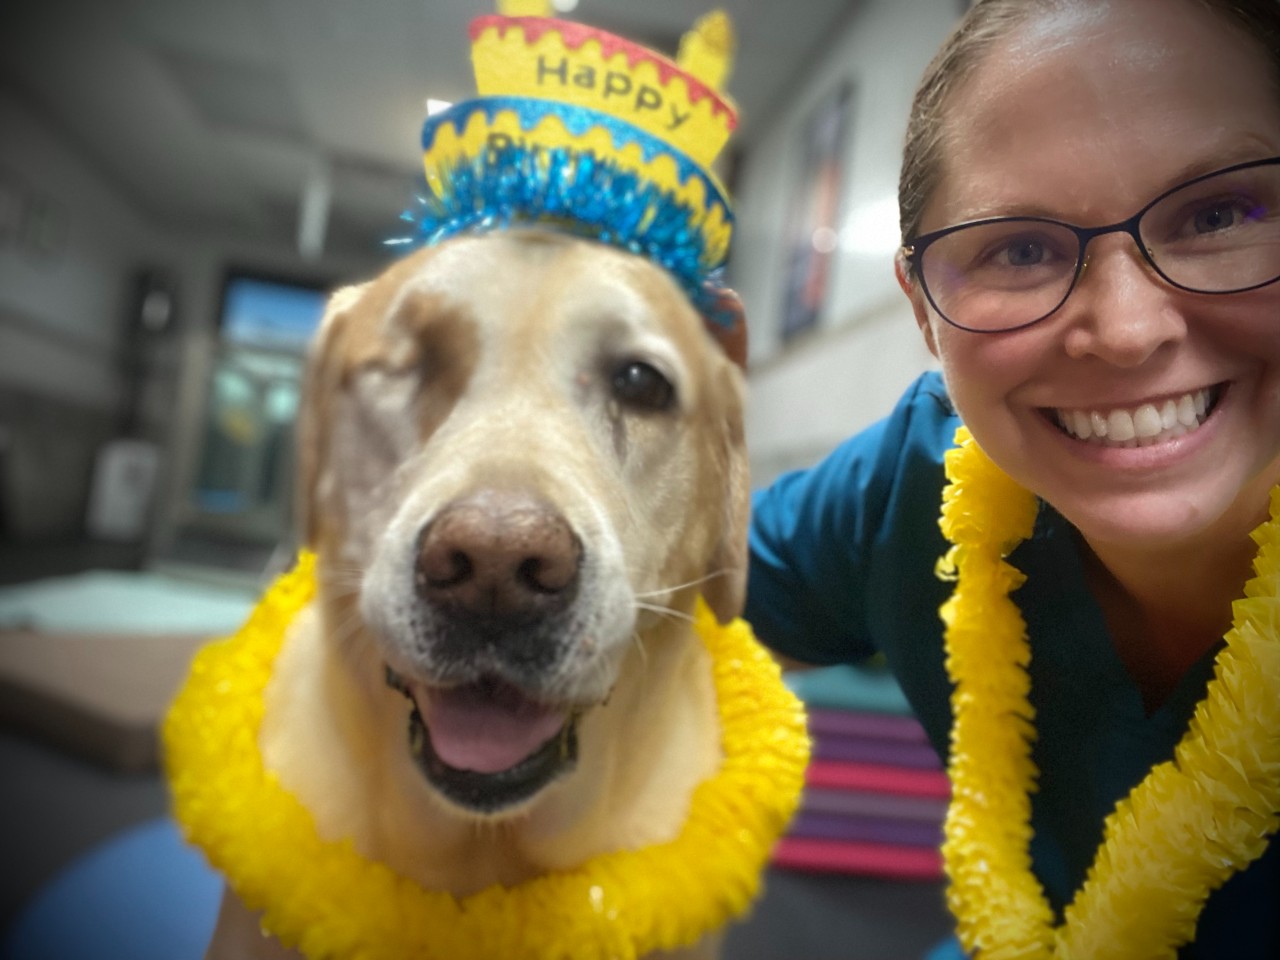 Lola and Emily celebrated Lola's birthday one day during their rehab session.